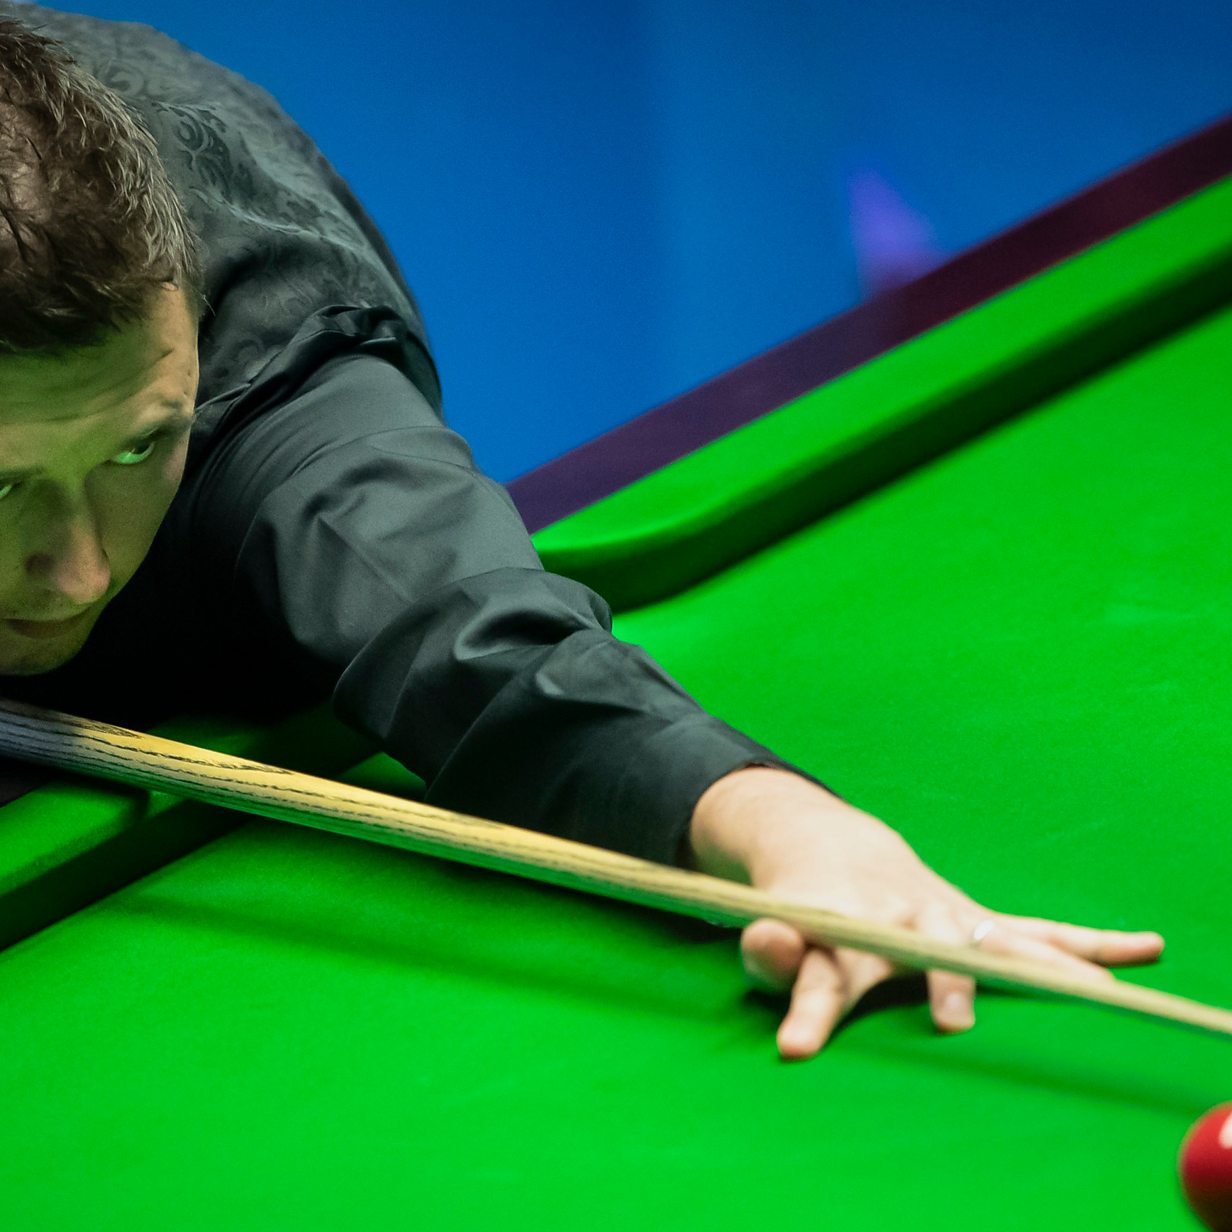 World Snooker Wilson seals comeback win over Hawkins with back-to-back centuries